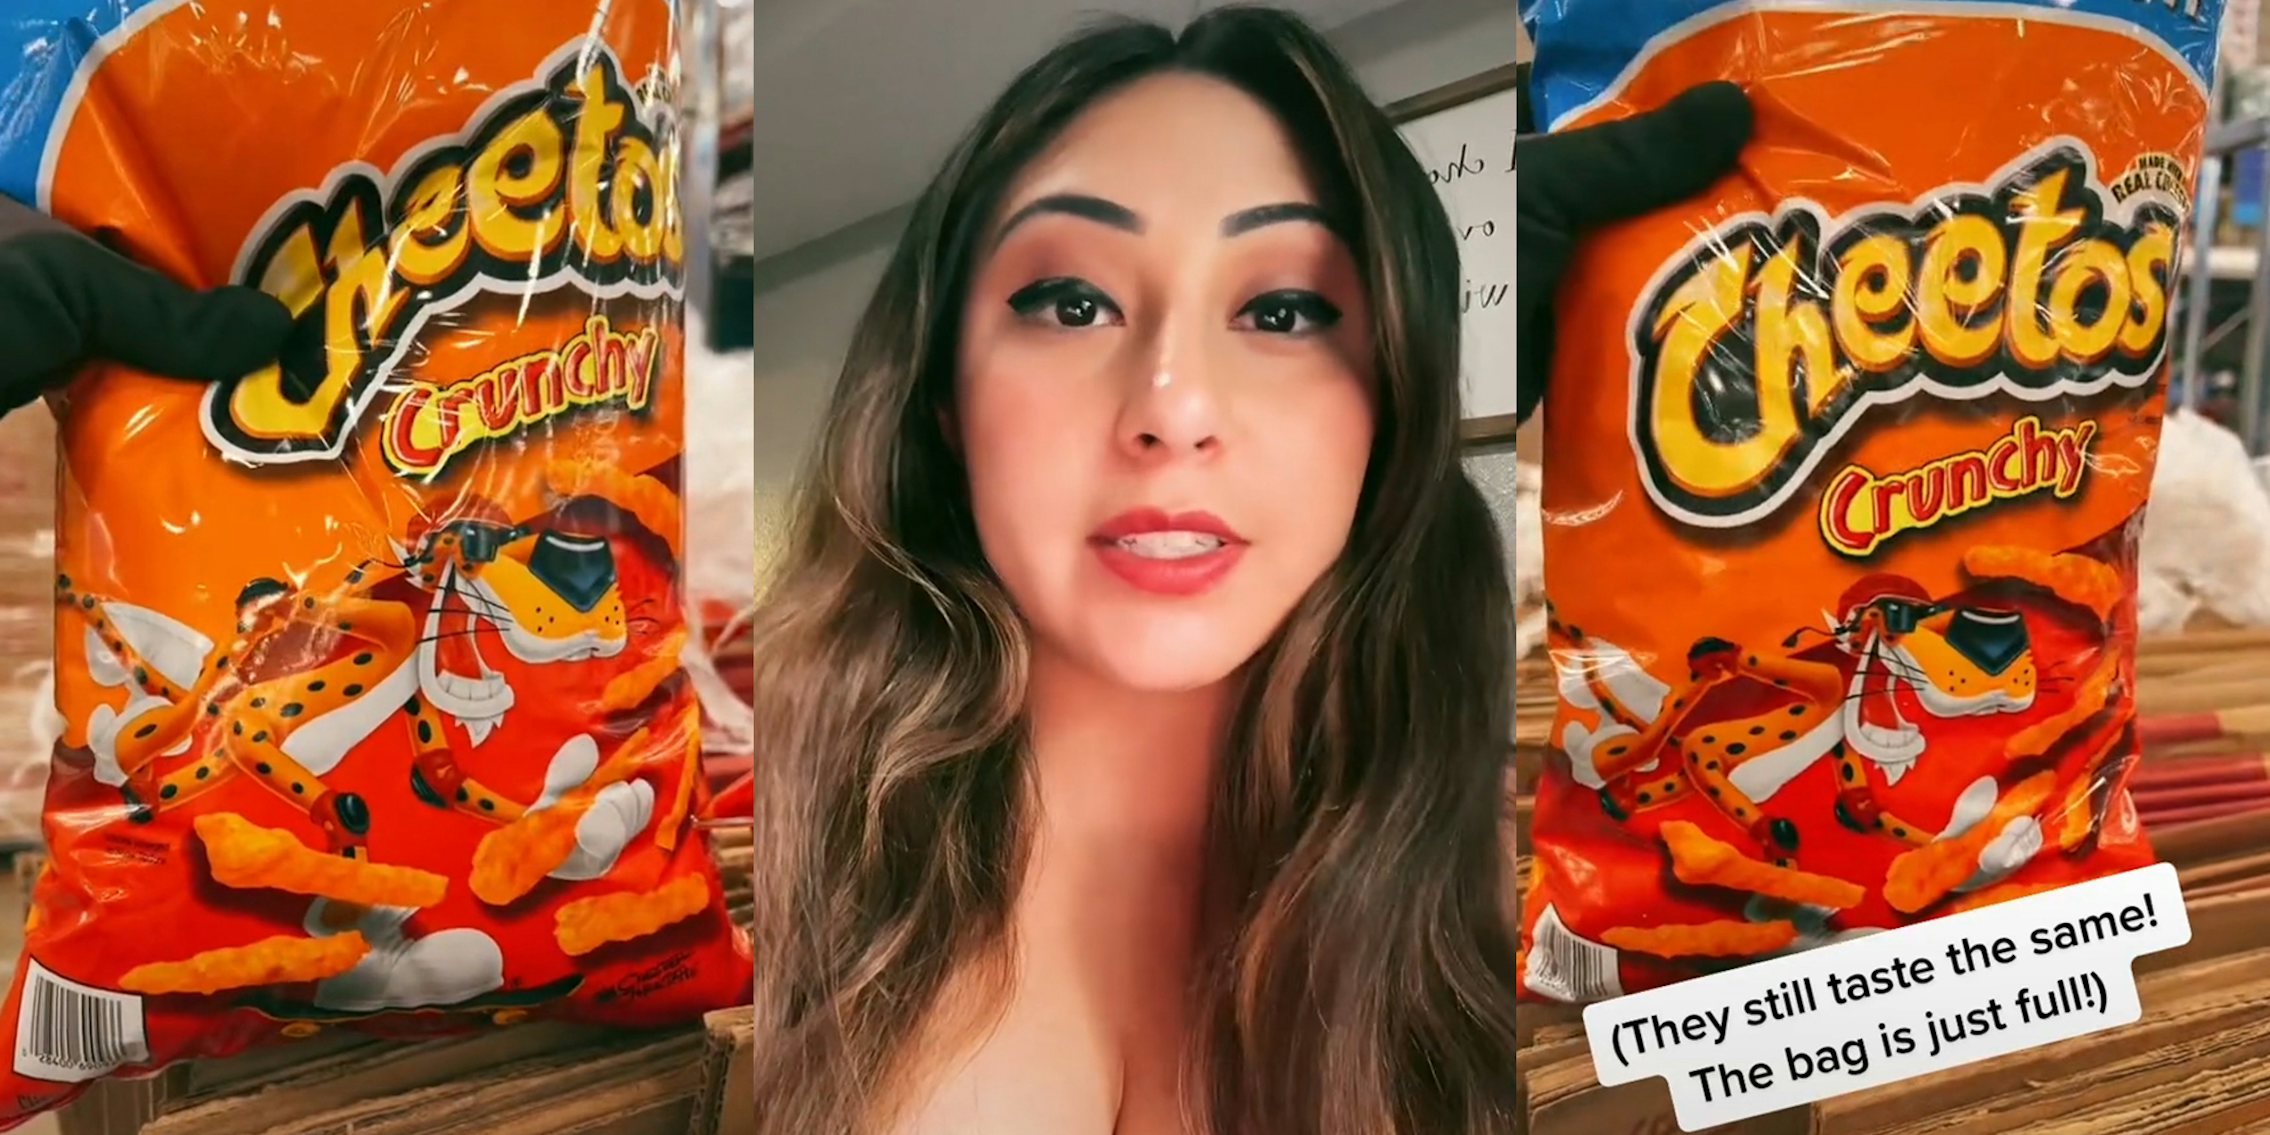 hand holding cheetos bag (l&r) young woman speaking (c)